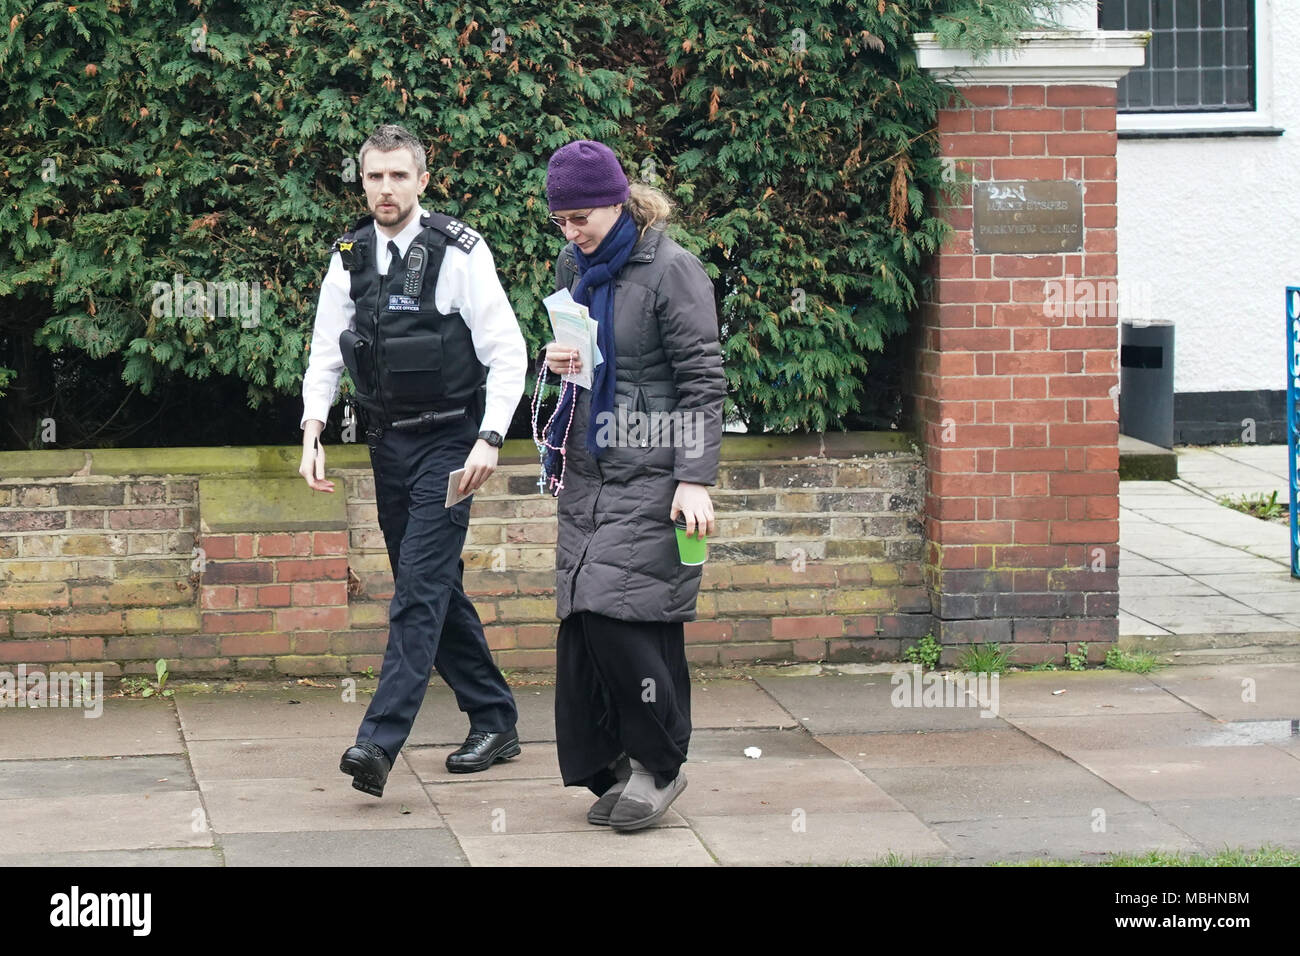 London, UIK. 11th April 2018. Police arrive at the Marie Stopes abortion clinic in Mattock Lane, Ealing, London, after Ealing Council's decision to impose a ban on protests outside the clinic. Photo date: Wednesday, April 11, 2018. Credit: Roger Garfield/Alamy Live News Stock Photo